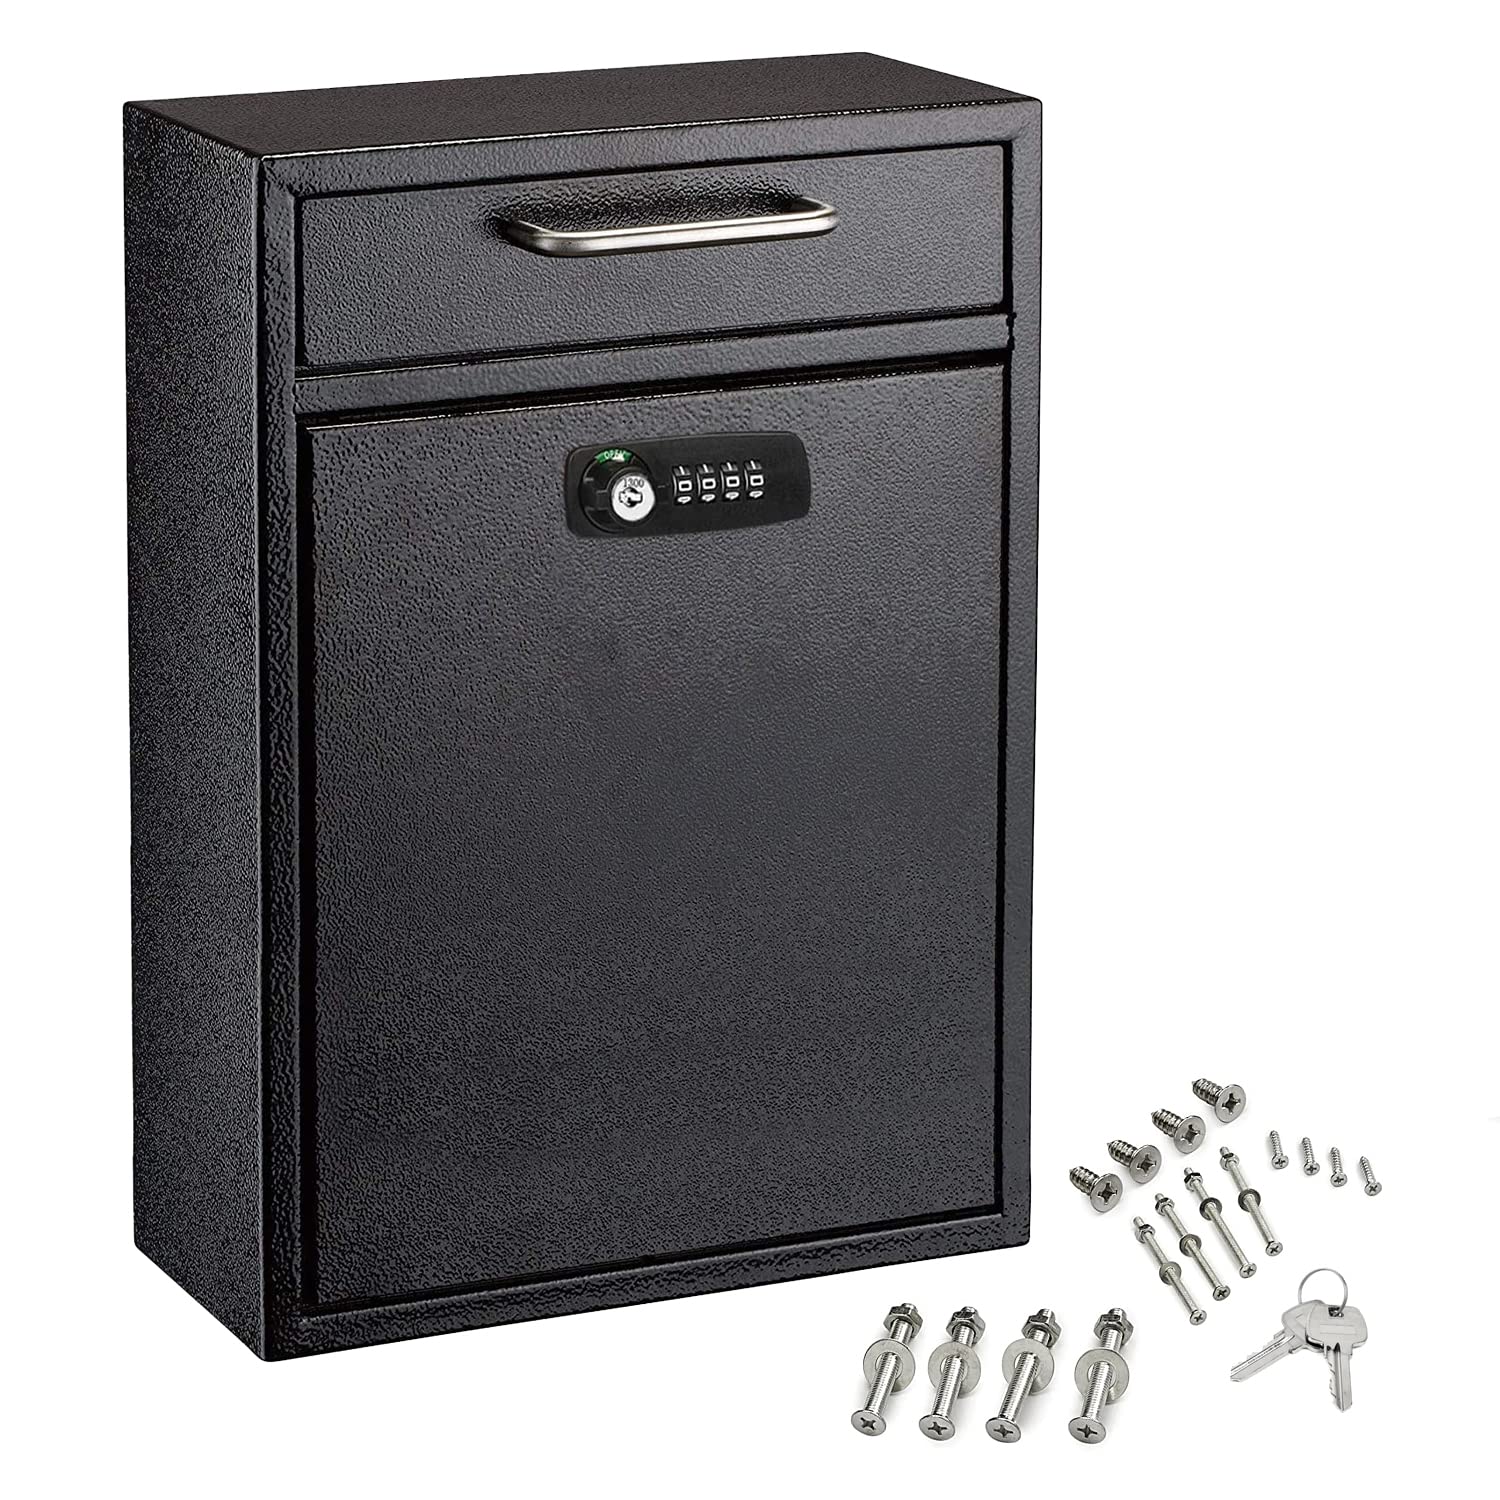 AdirOffice Ultimate Drop Box Wall-Mounted Mailbox - Hanging Secured Postbox - Durable Spacious Key or Combination Lock Box Perfect for After Hours Deposits Payments Key and Letter Drops  - Like New